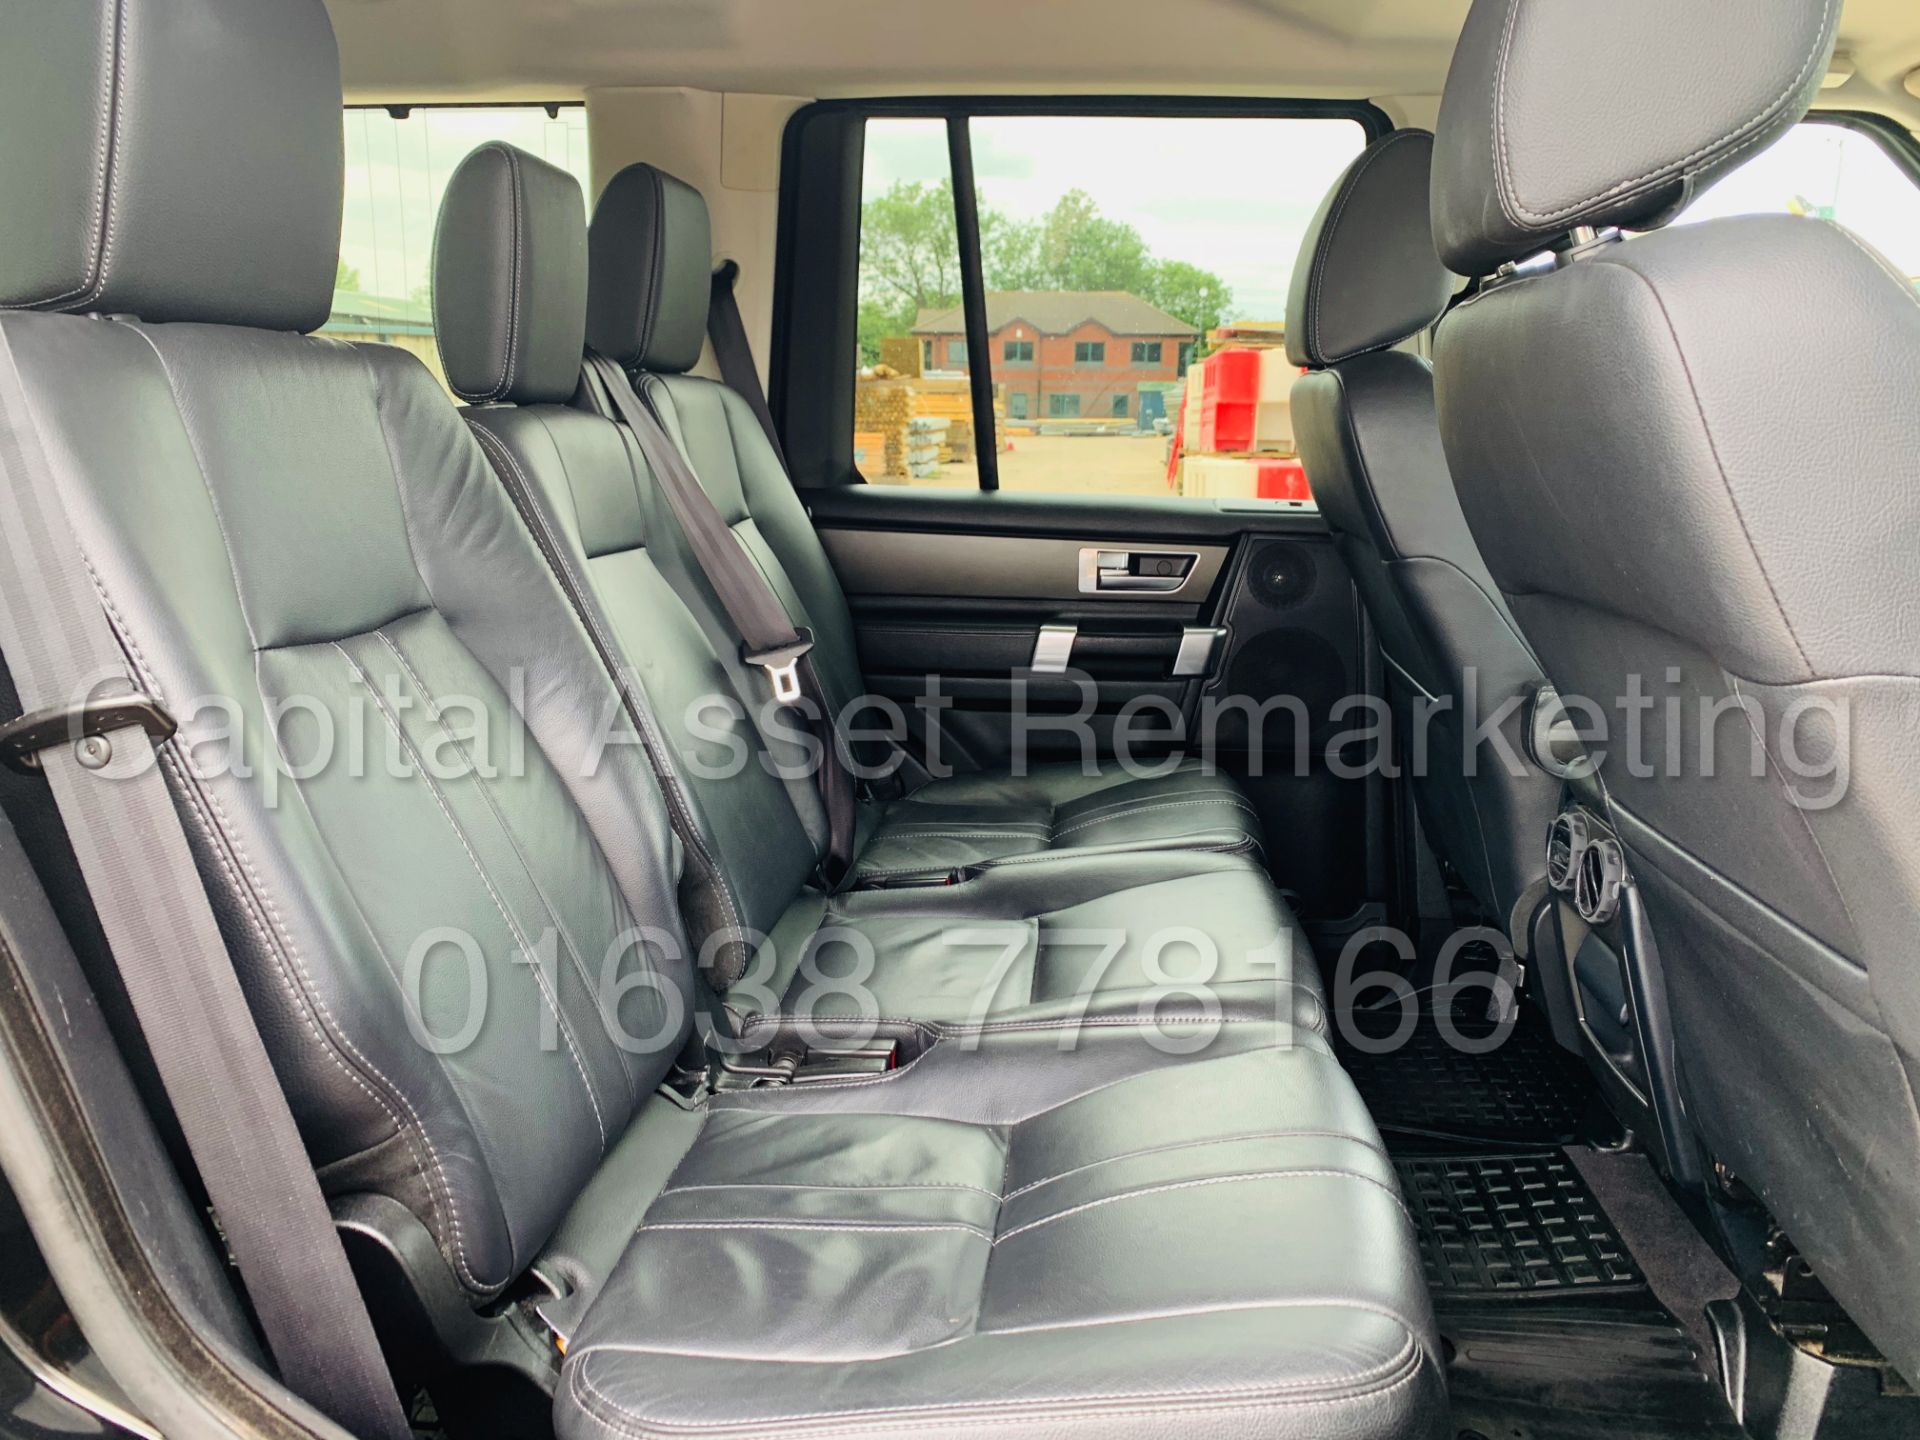 (On Sale) LAND ROVER DISCOVERY 4 *SE TECH* 7 SEATER SUV (2016) '3.0 SDV6 - 8 SPEED AUTO' (1 OWNER) - Image 30 of 53